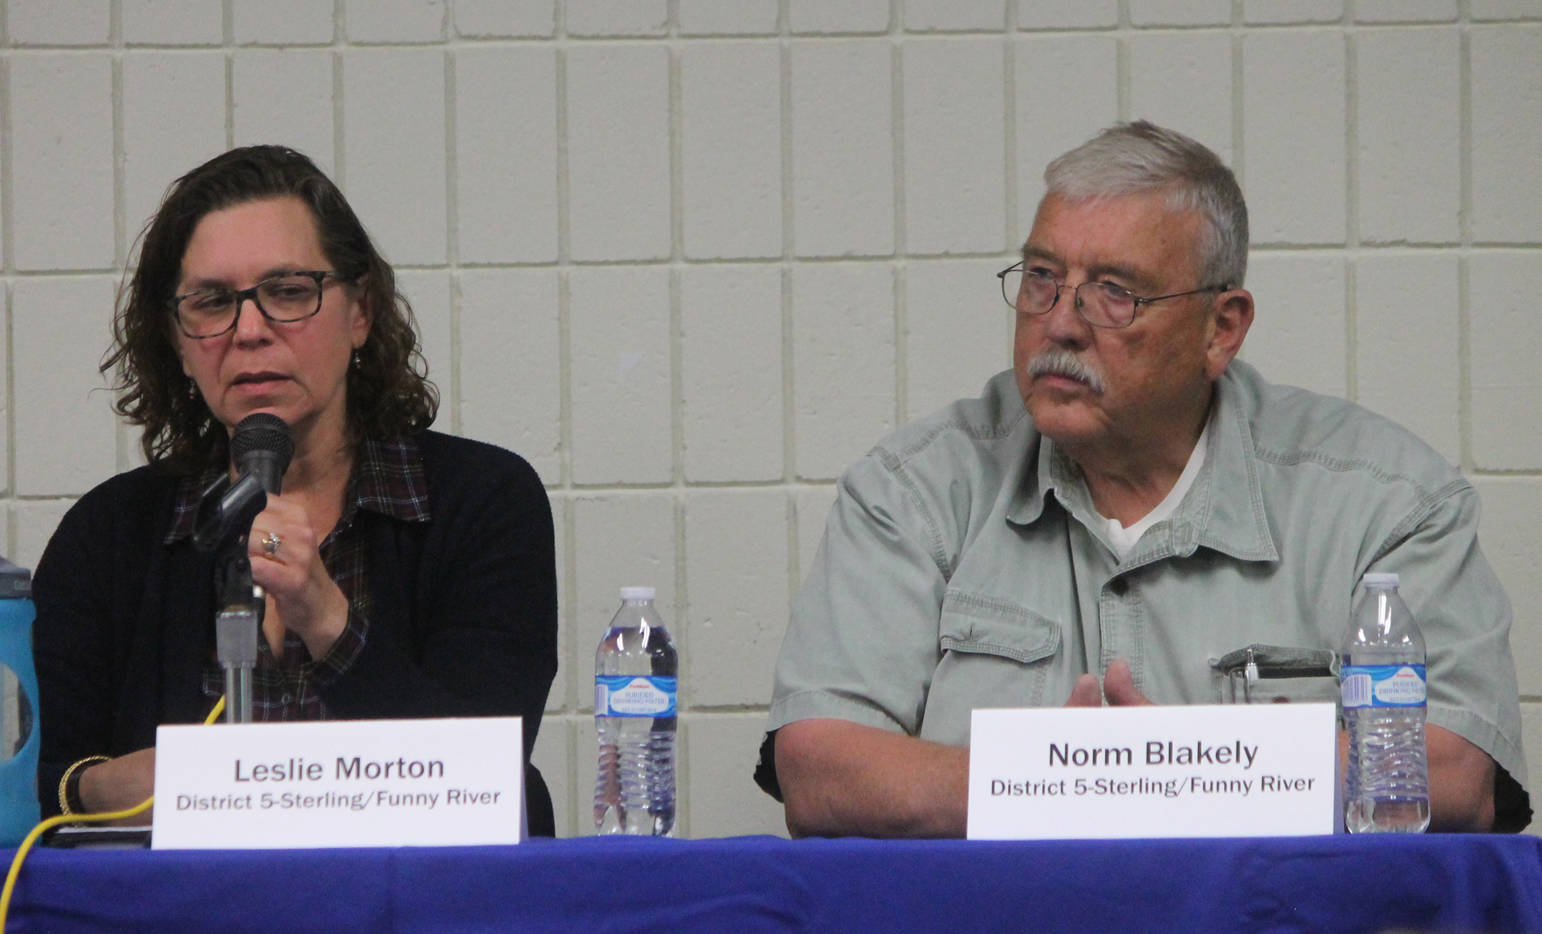 Leslie Morton, left, answers a question while Norm Blakeley listens during a forum for Kenai Peninsula Borough Assembly candidates Wednesday at a joint meeting of the Kenai and Soldotna Chambers of Commerce. Morton and Blakely are running for the District 5-Sterling/Funny River seat. (Photo by Will Morrow/Peninsula Clarion)